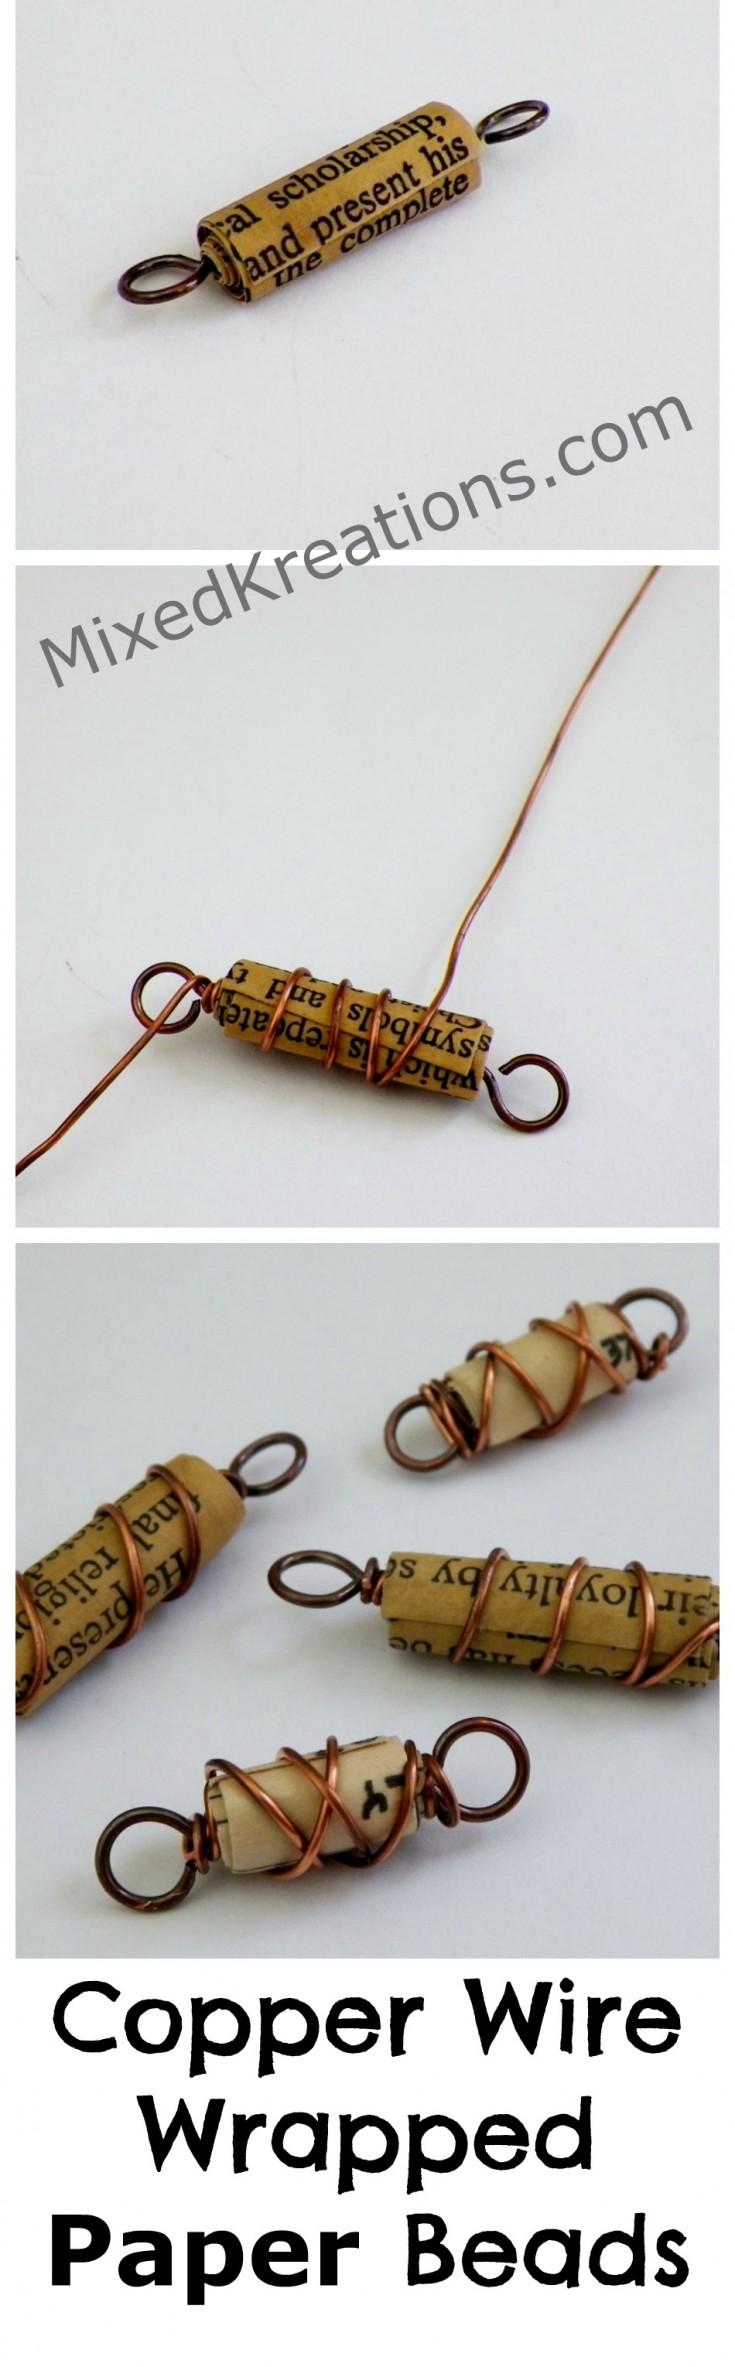 How to make a copper wire wrapped paper beads | handmade copper and paper beads #HandmadeBeads #diy #JewelryMaking #Beads MixedKreations.com